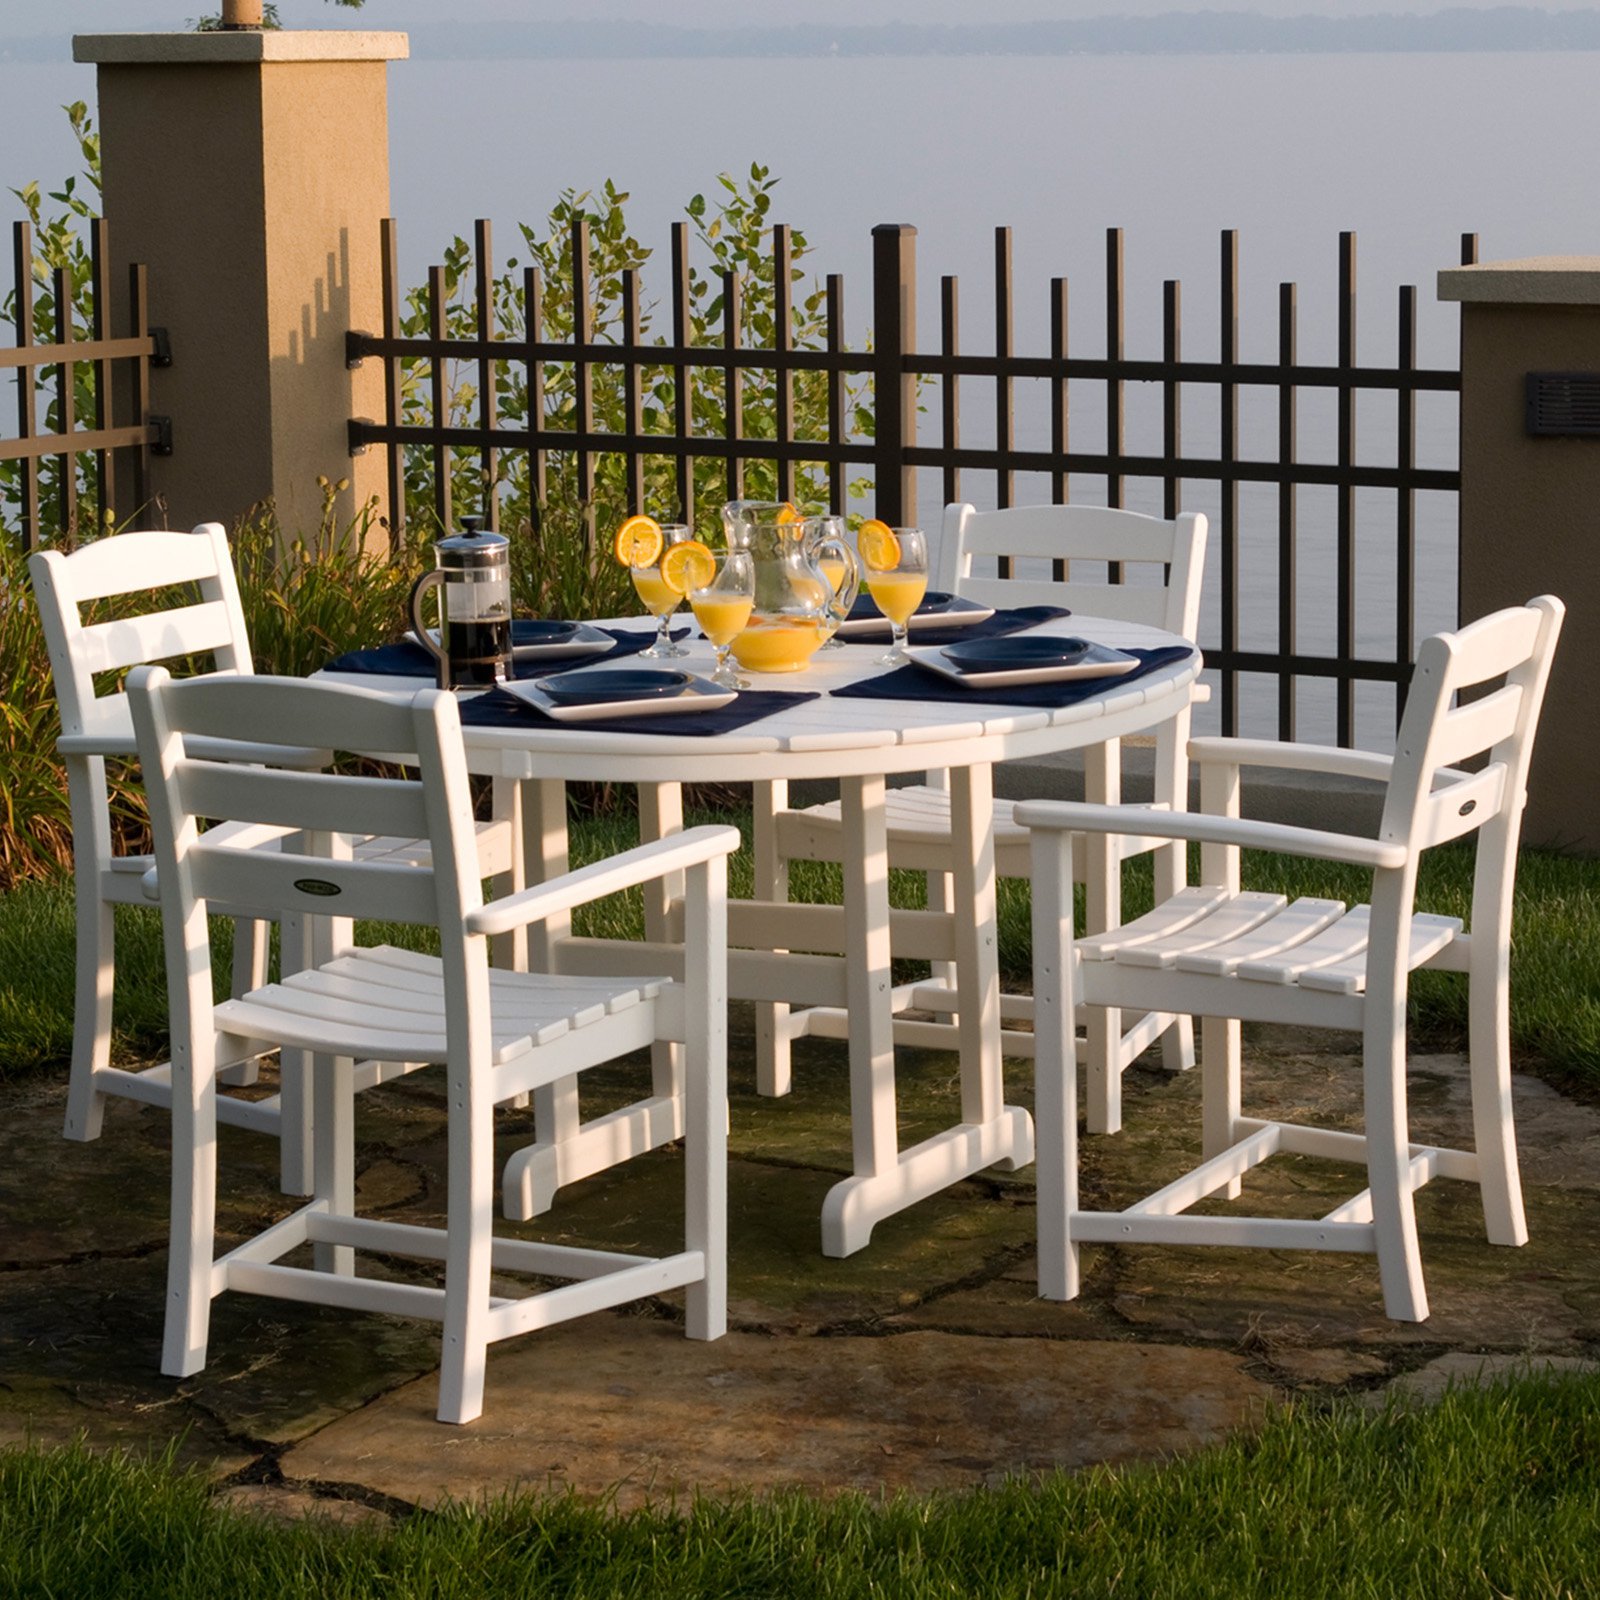 POLYWOOD La Casa Cafe 7-Piece Dining Set in White - image 2 of 4